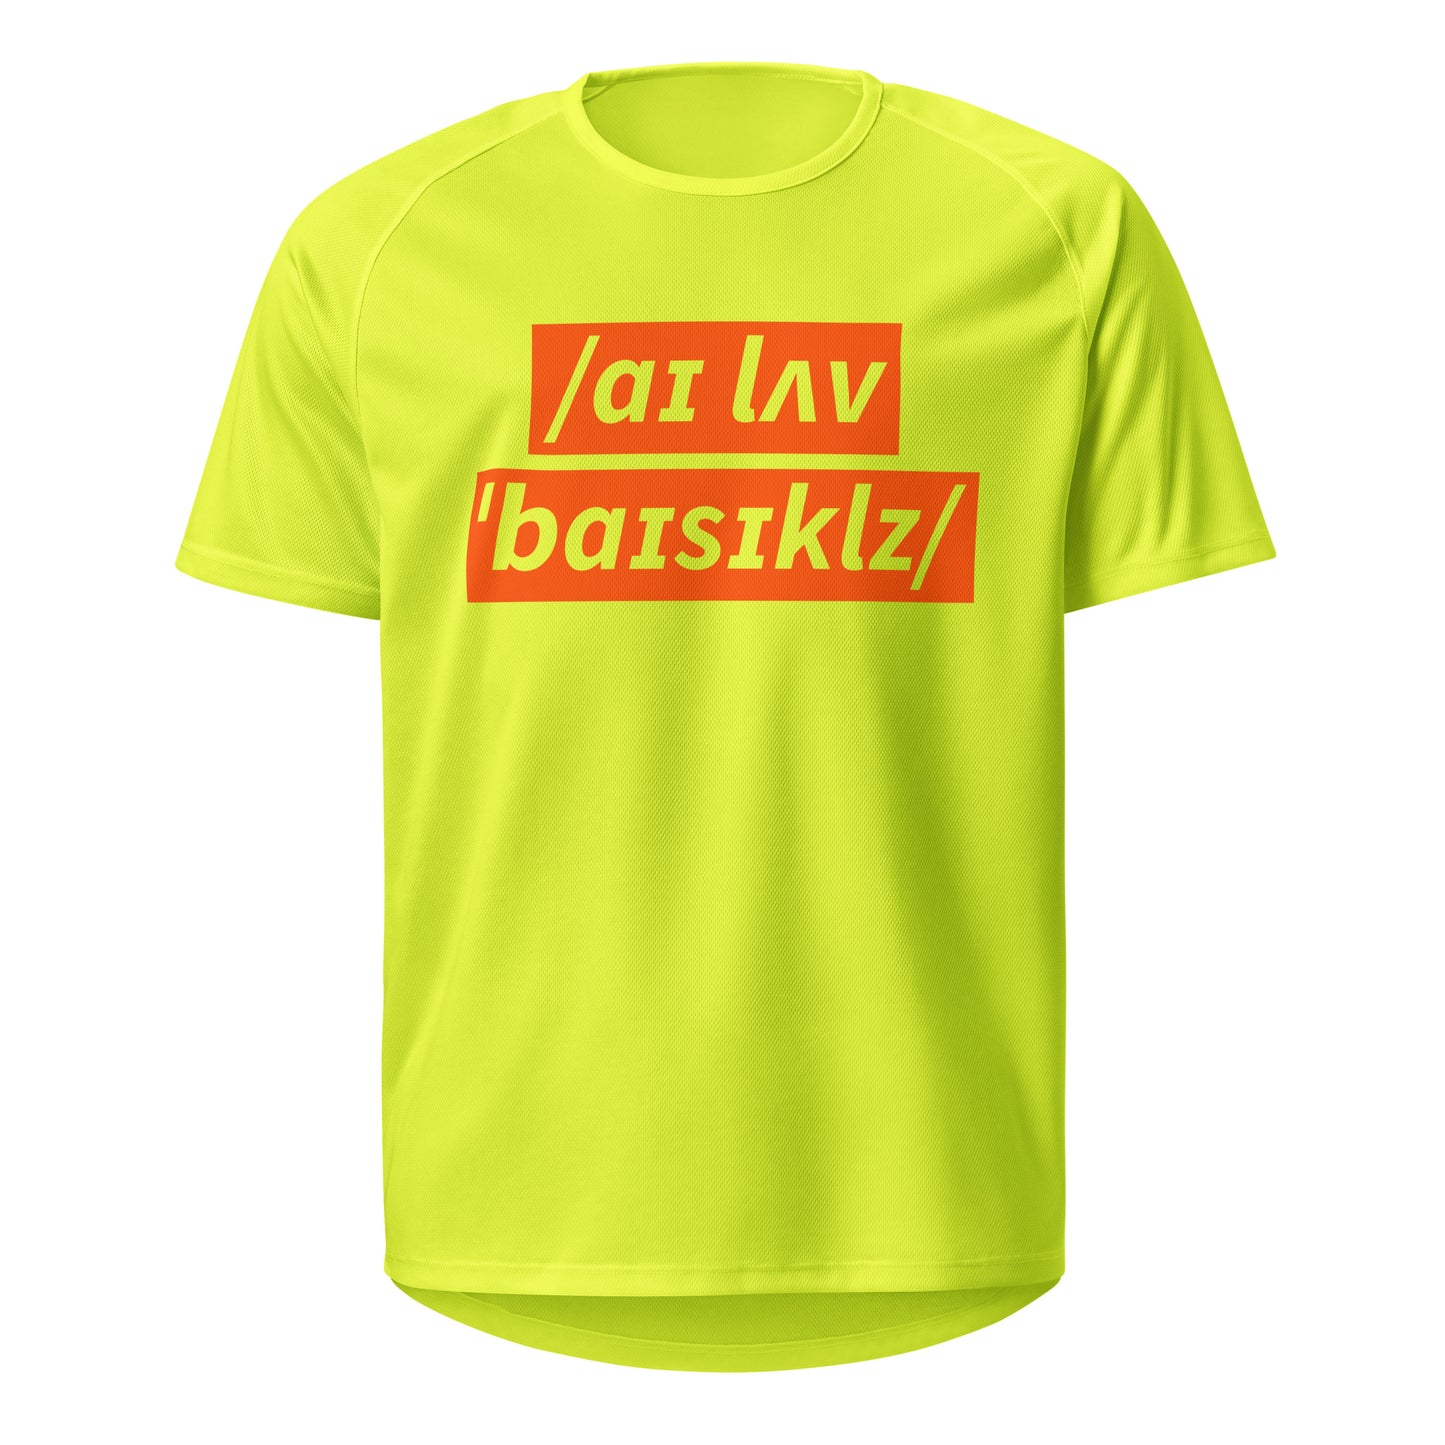 I Love Bicycles Sports Jersey, Adult Cyclist